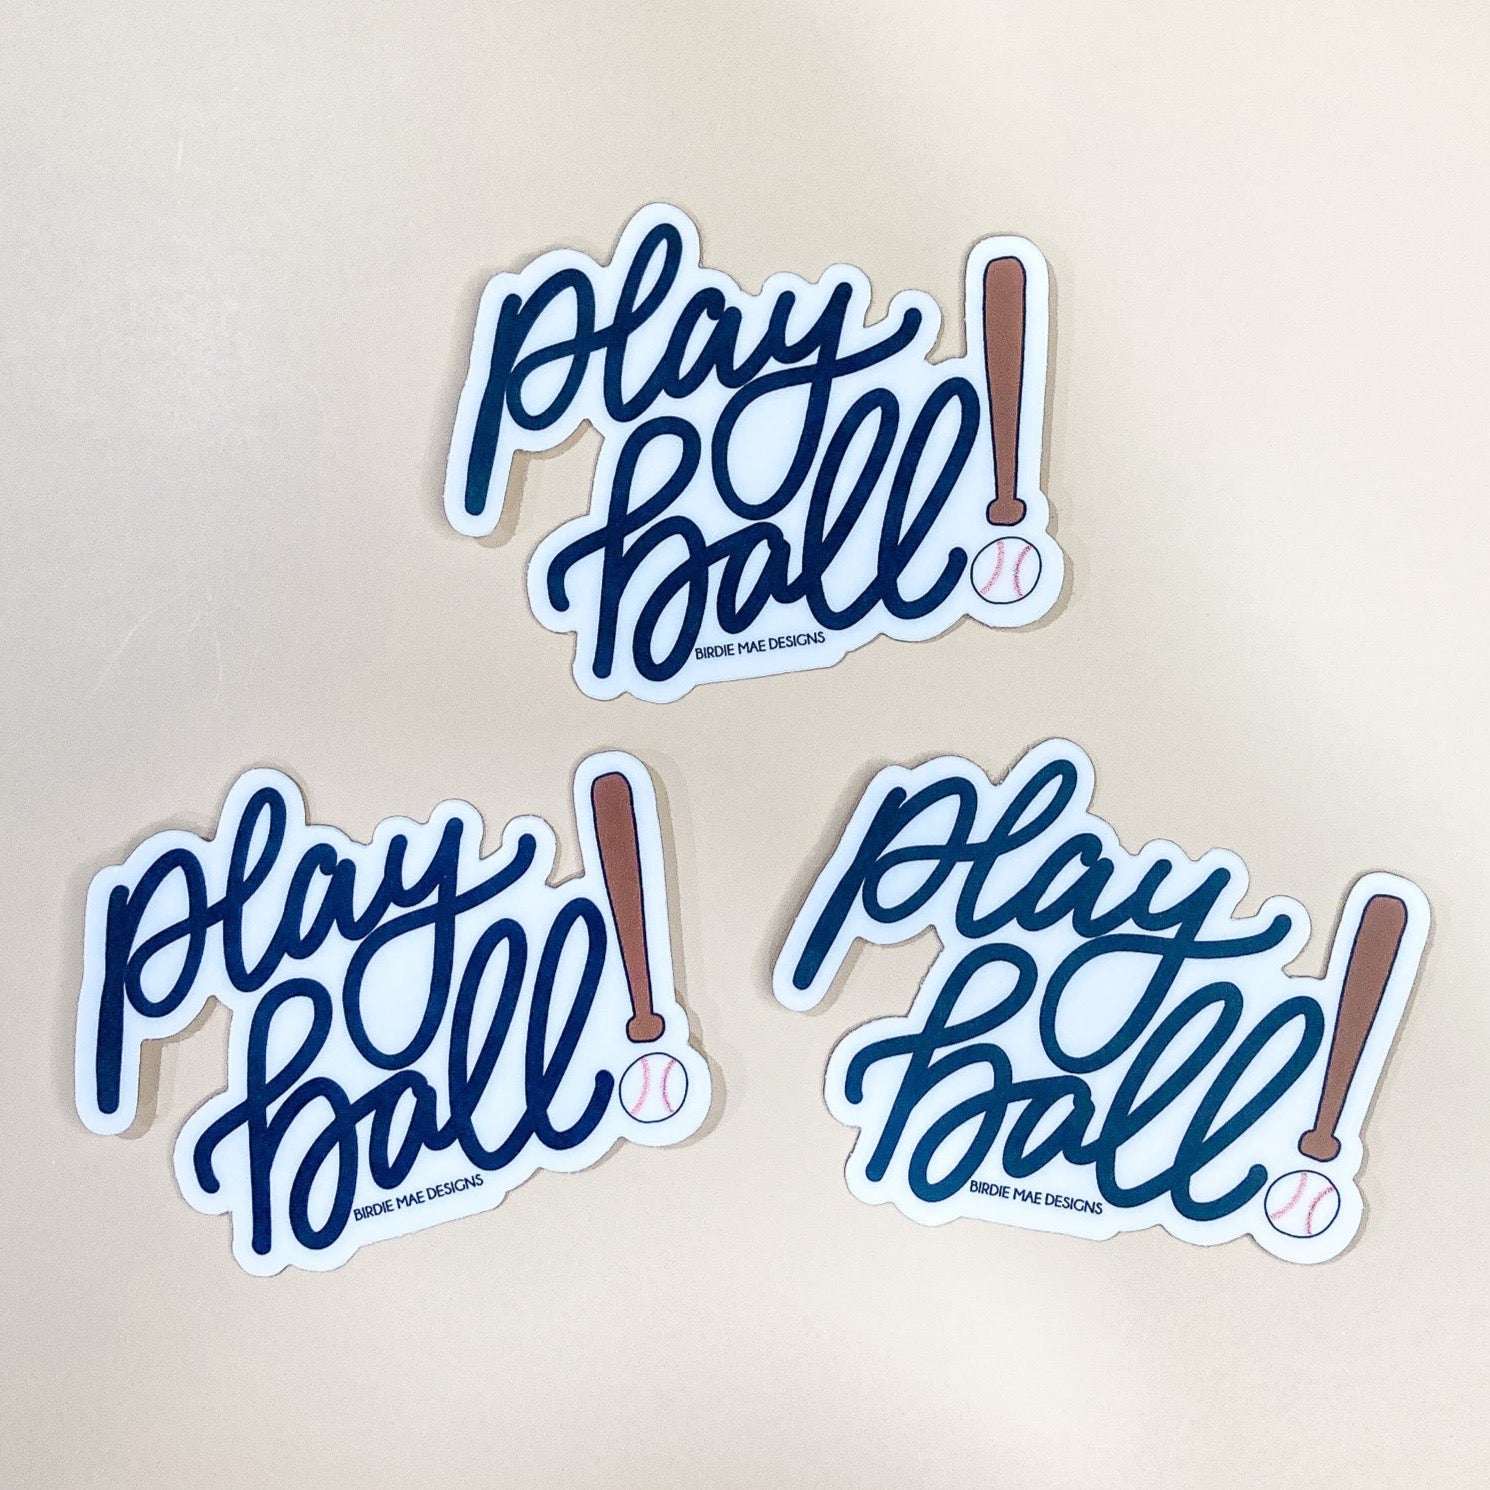 Baseball 'Play Ball' Sticker. Water bottle Sticker.Crafted from robust vinyl and dishwasher-safe, Stanley Cup sticker, Yeti Cup Sticker